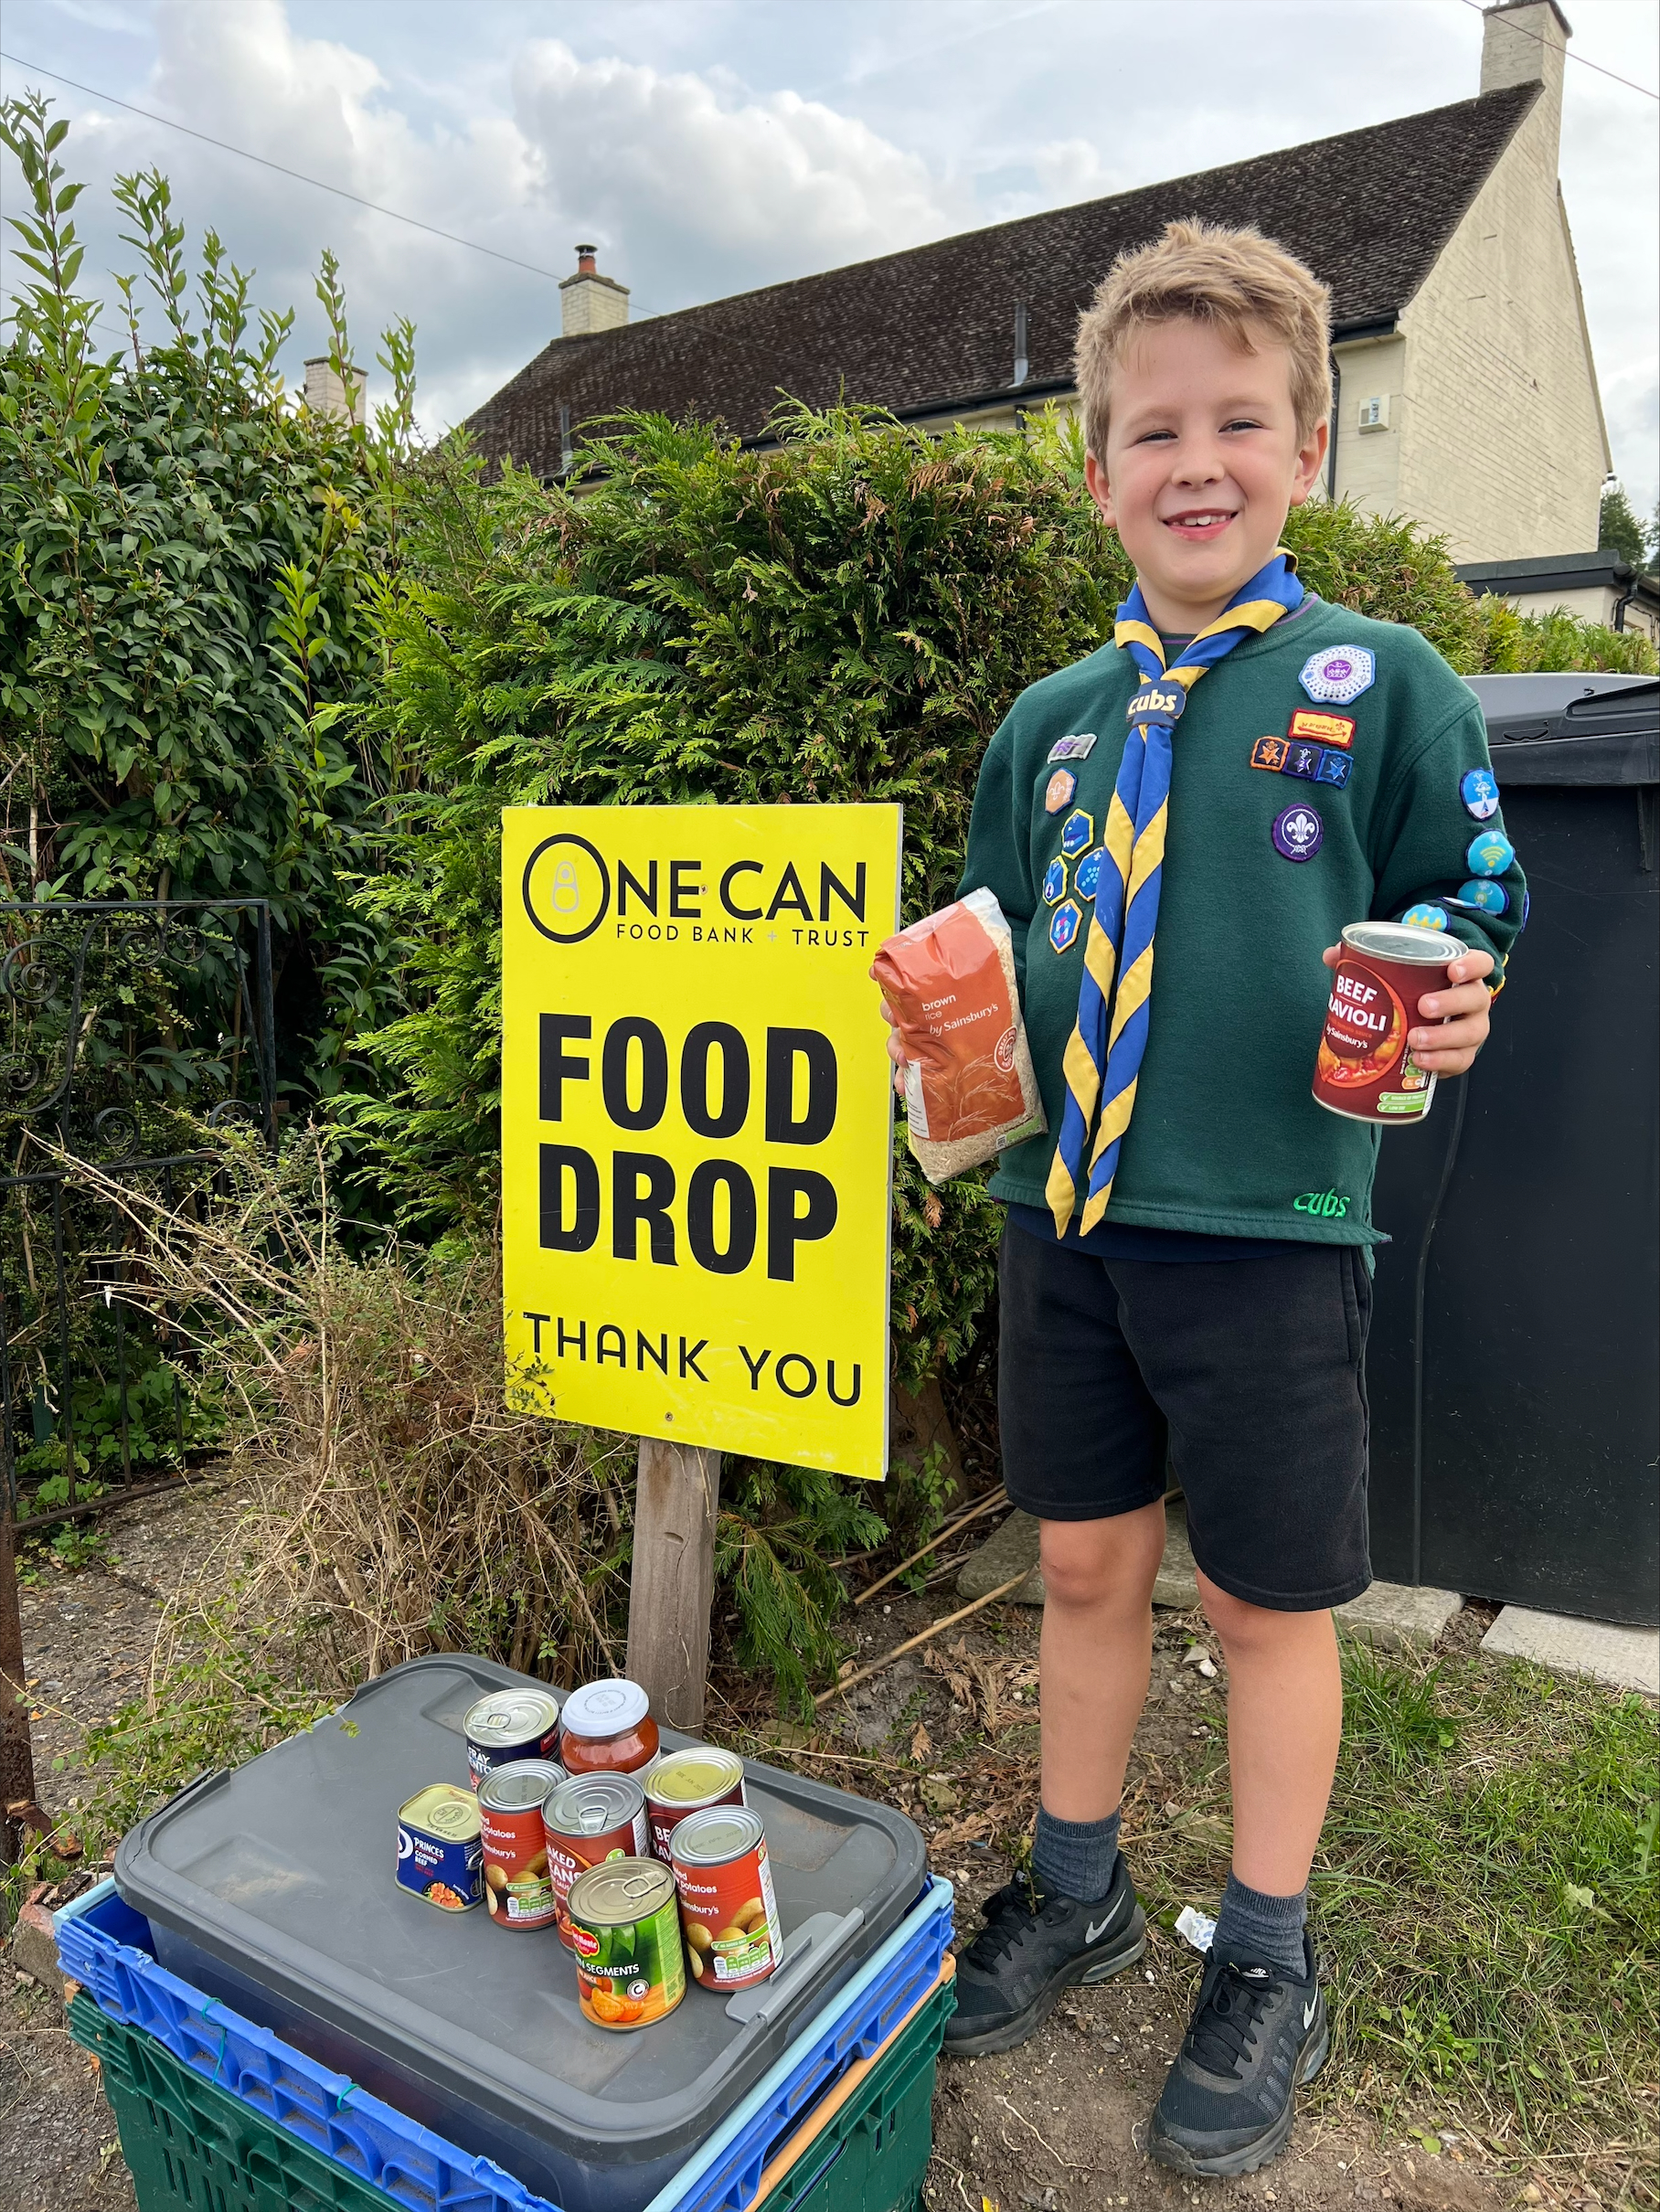 Henry Sinclair decided to set up a collection point outside his house to help those in the area get food. This began during the first lockdown period in the spring of 2020 amid the coronavirus pandemic